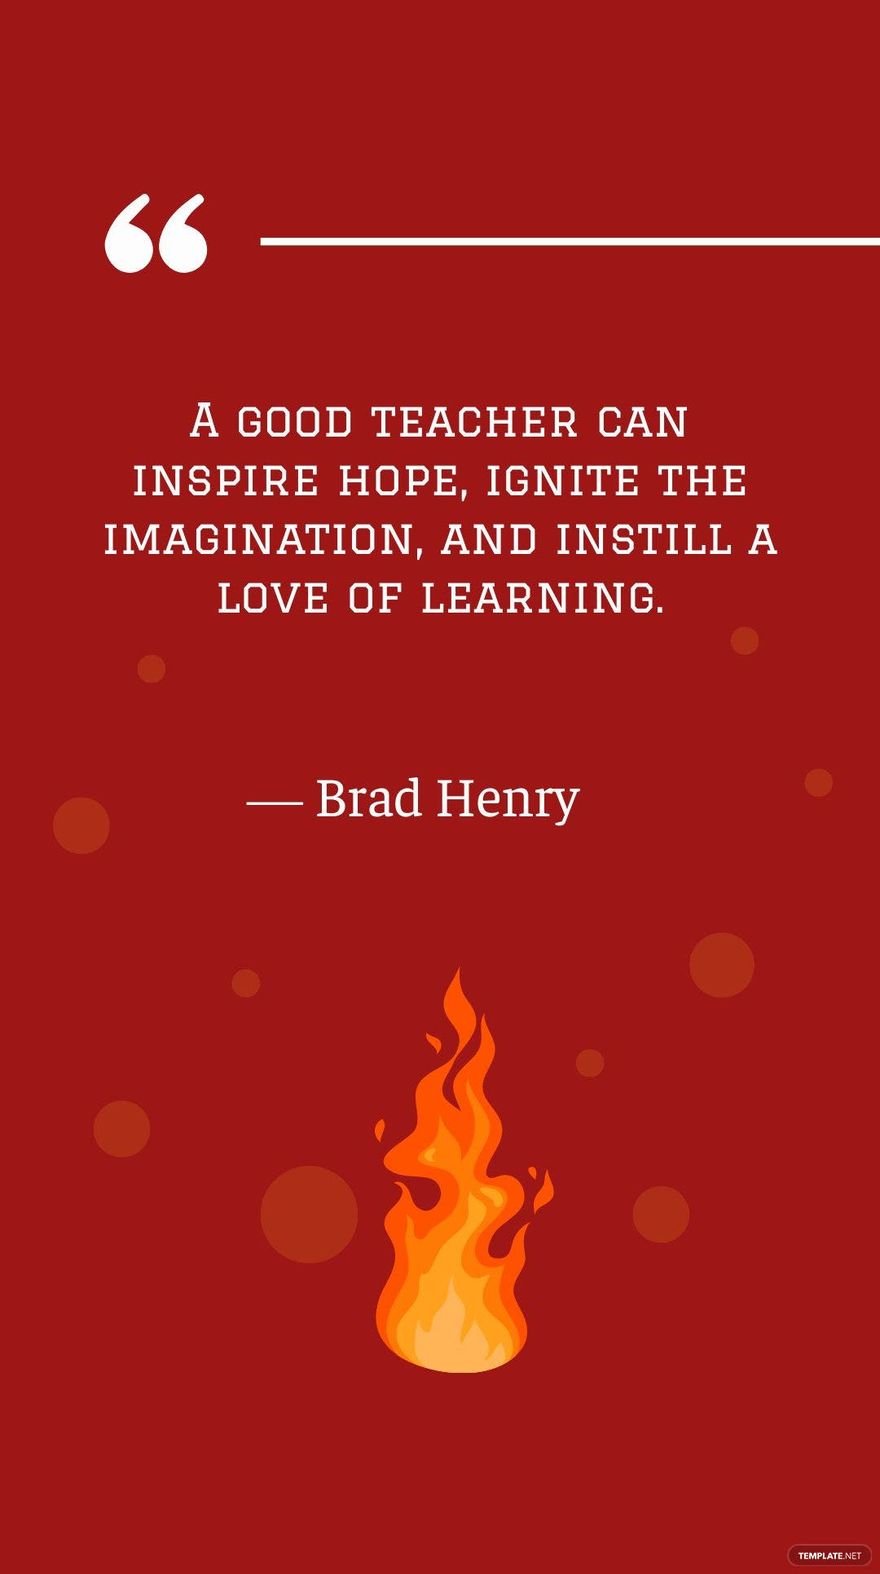 Brad Henry - A good teacher can inspire hope, ignite the imagination, and instill a love of learning. in JPG